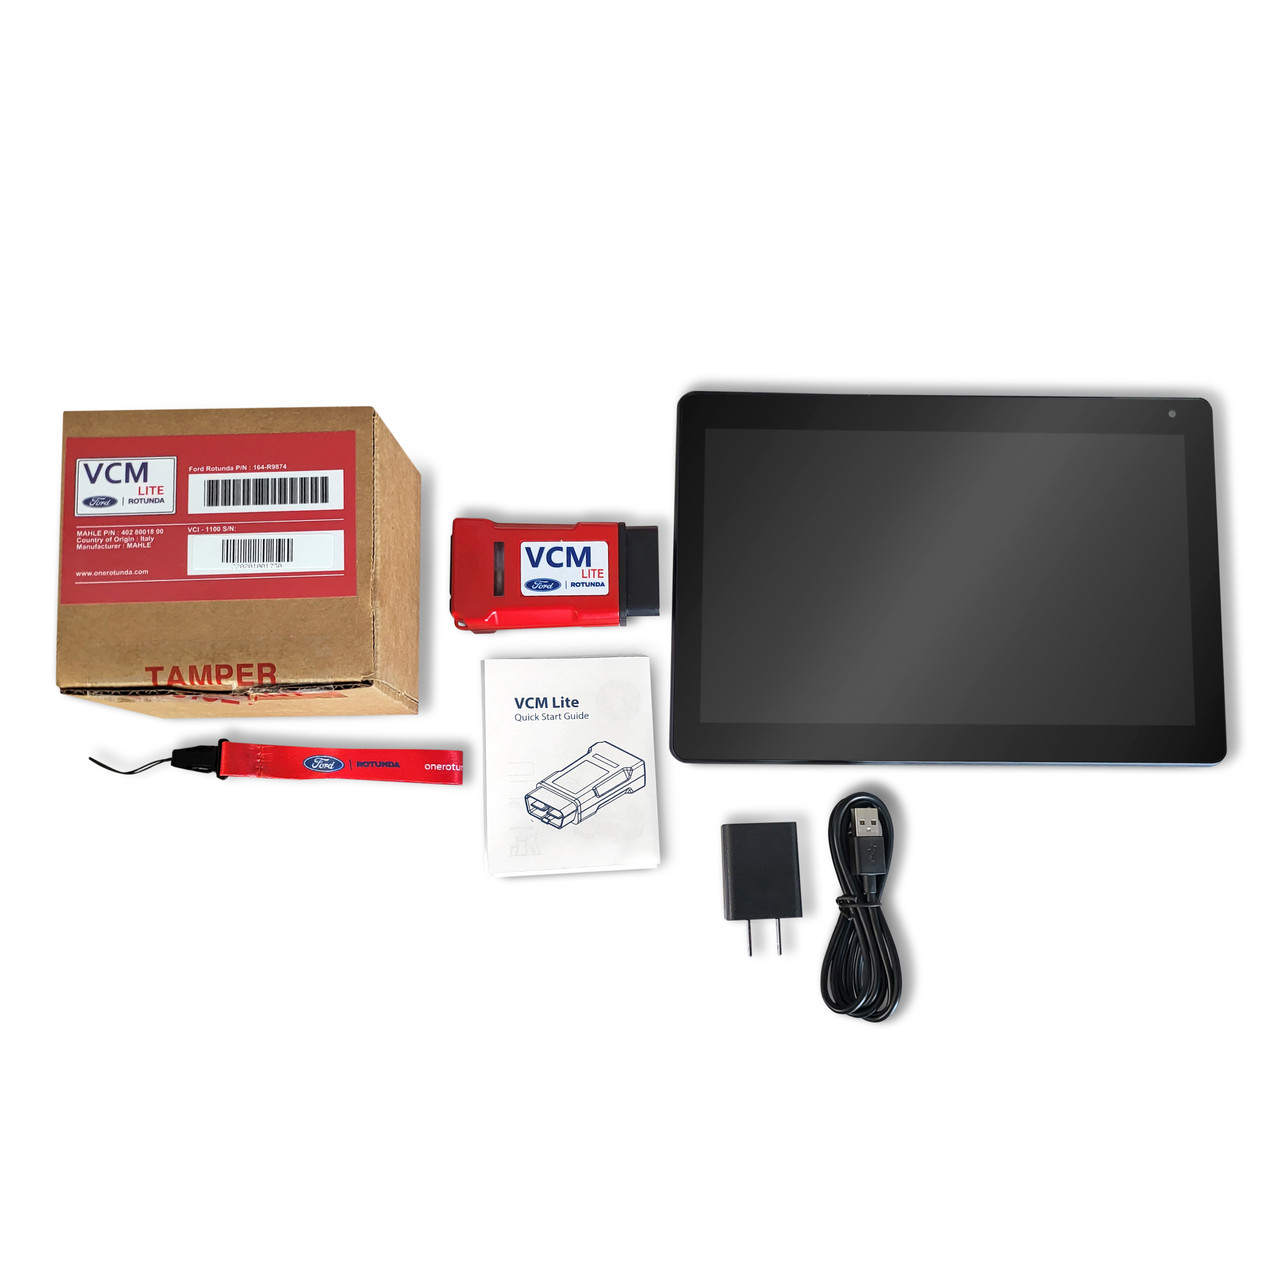 Ford VCM Lite 164-R9874 with Tablet